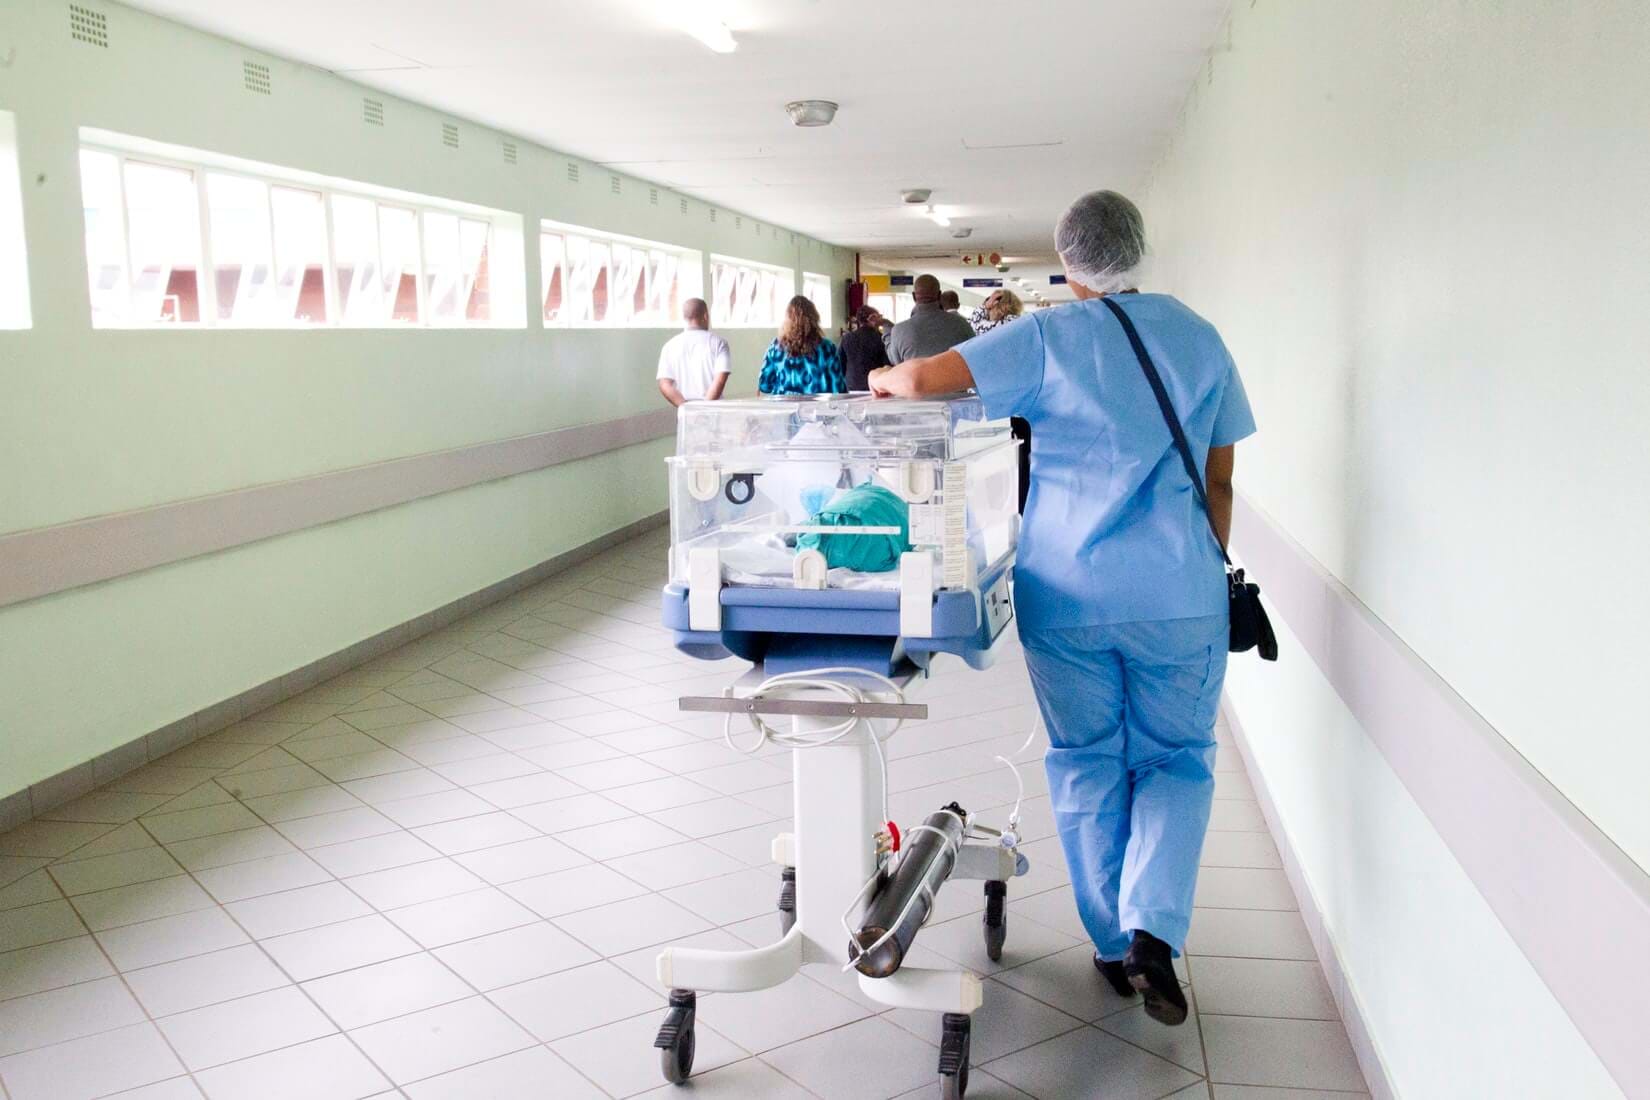 View of Person in Blue Medical Scrubs from Behind Rolling Incubator Down Hallway